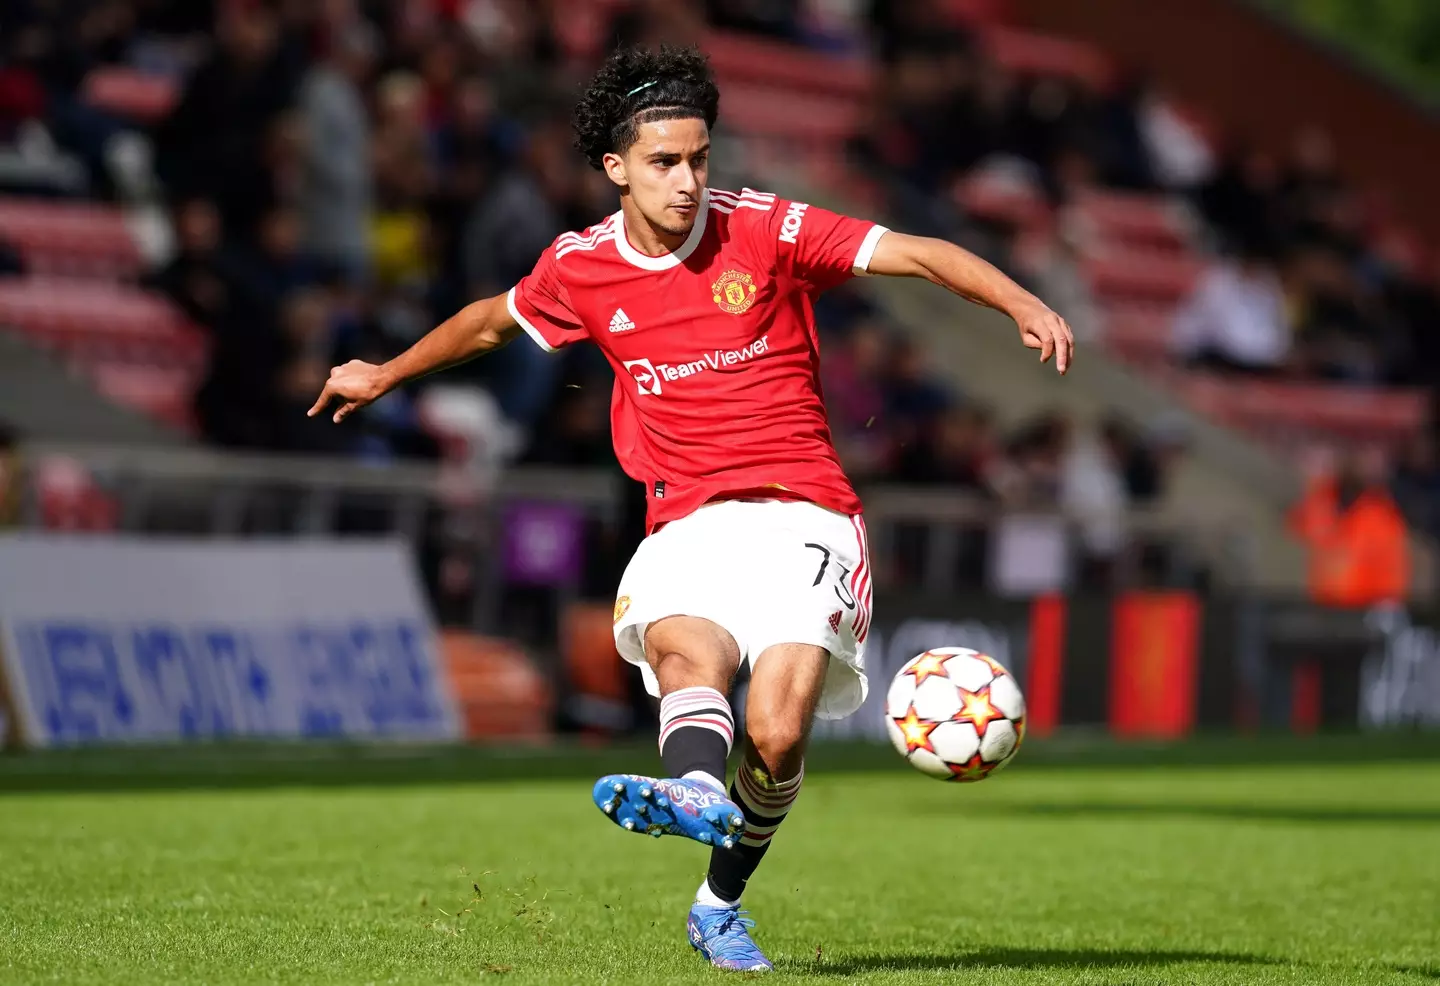 Iqbal playing for United's youth team. Image: Alamy